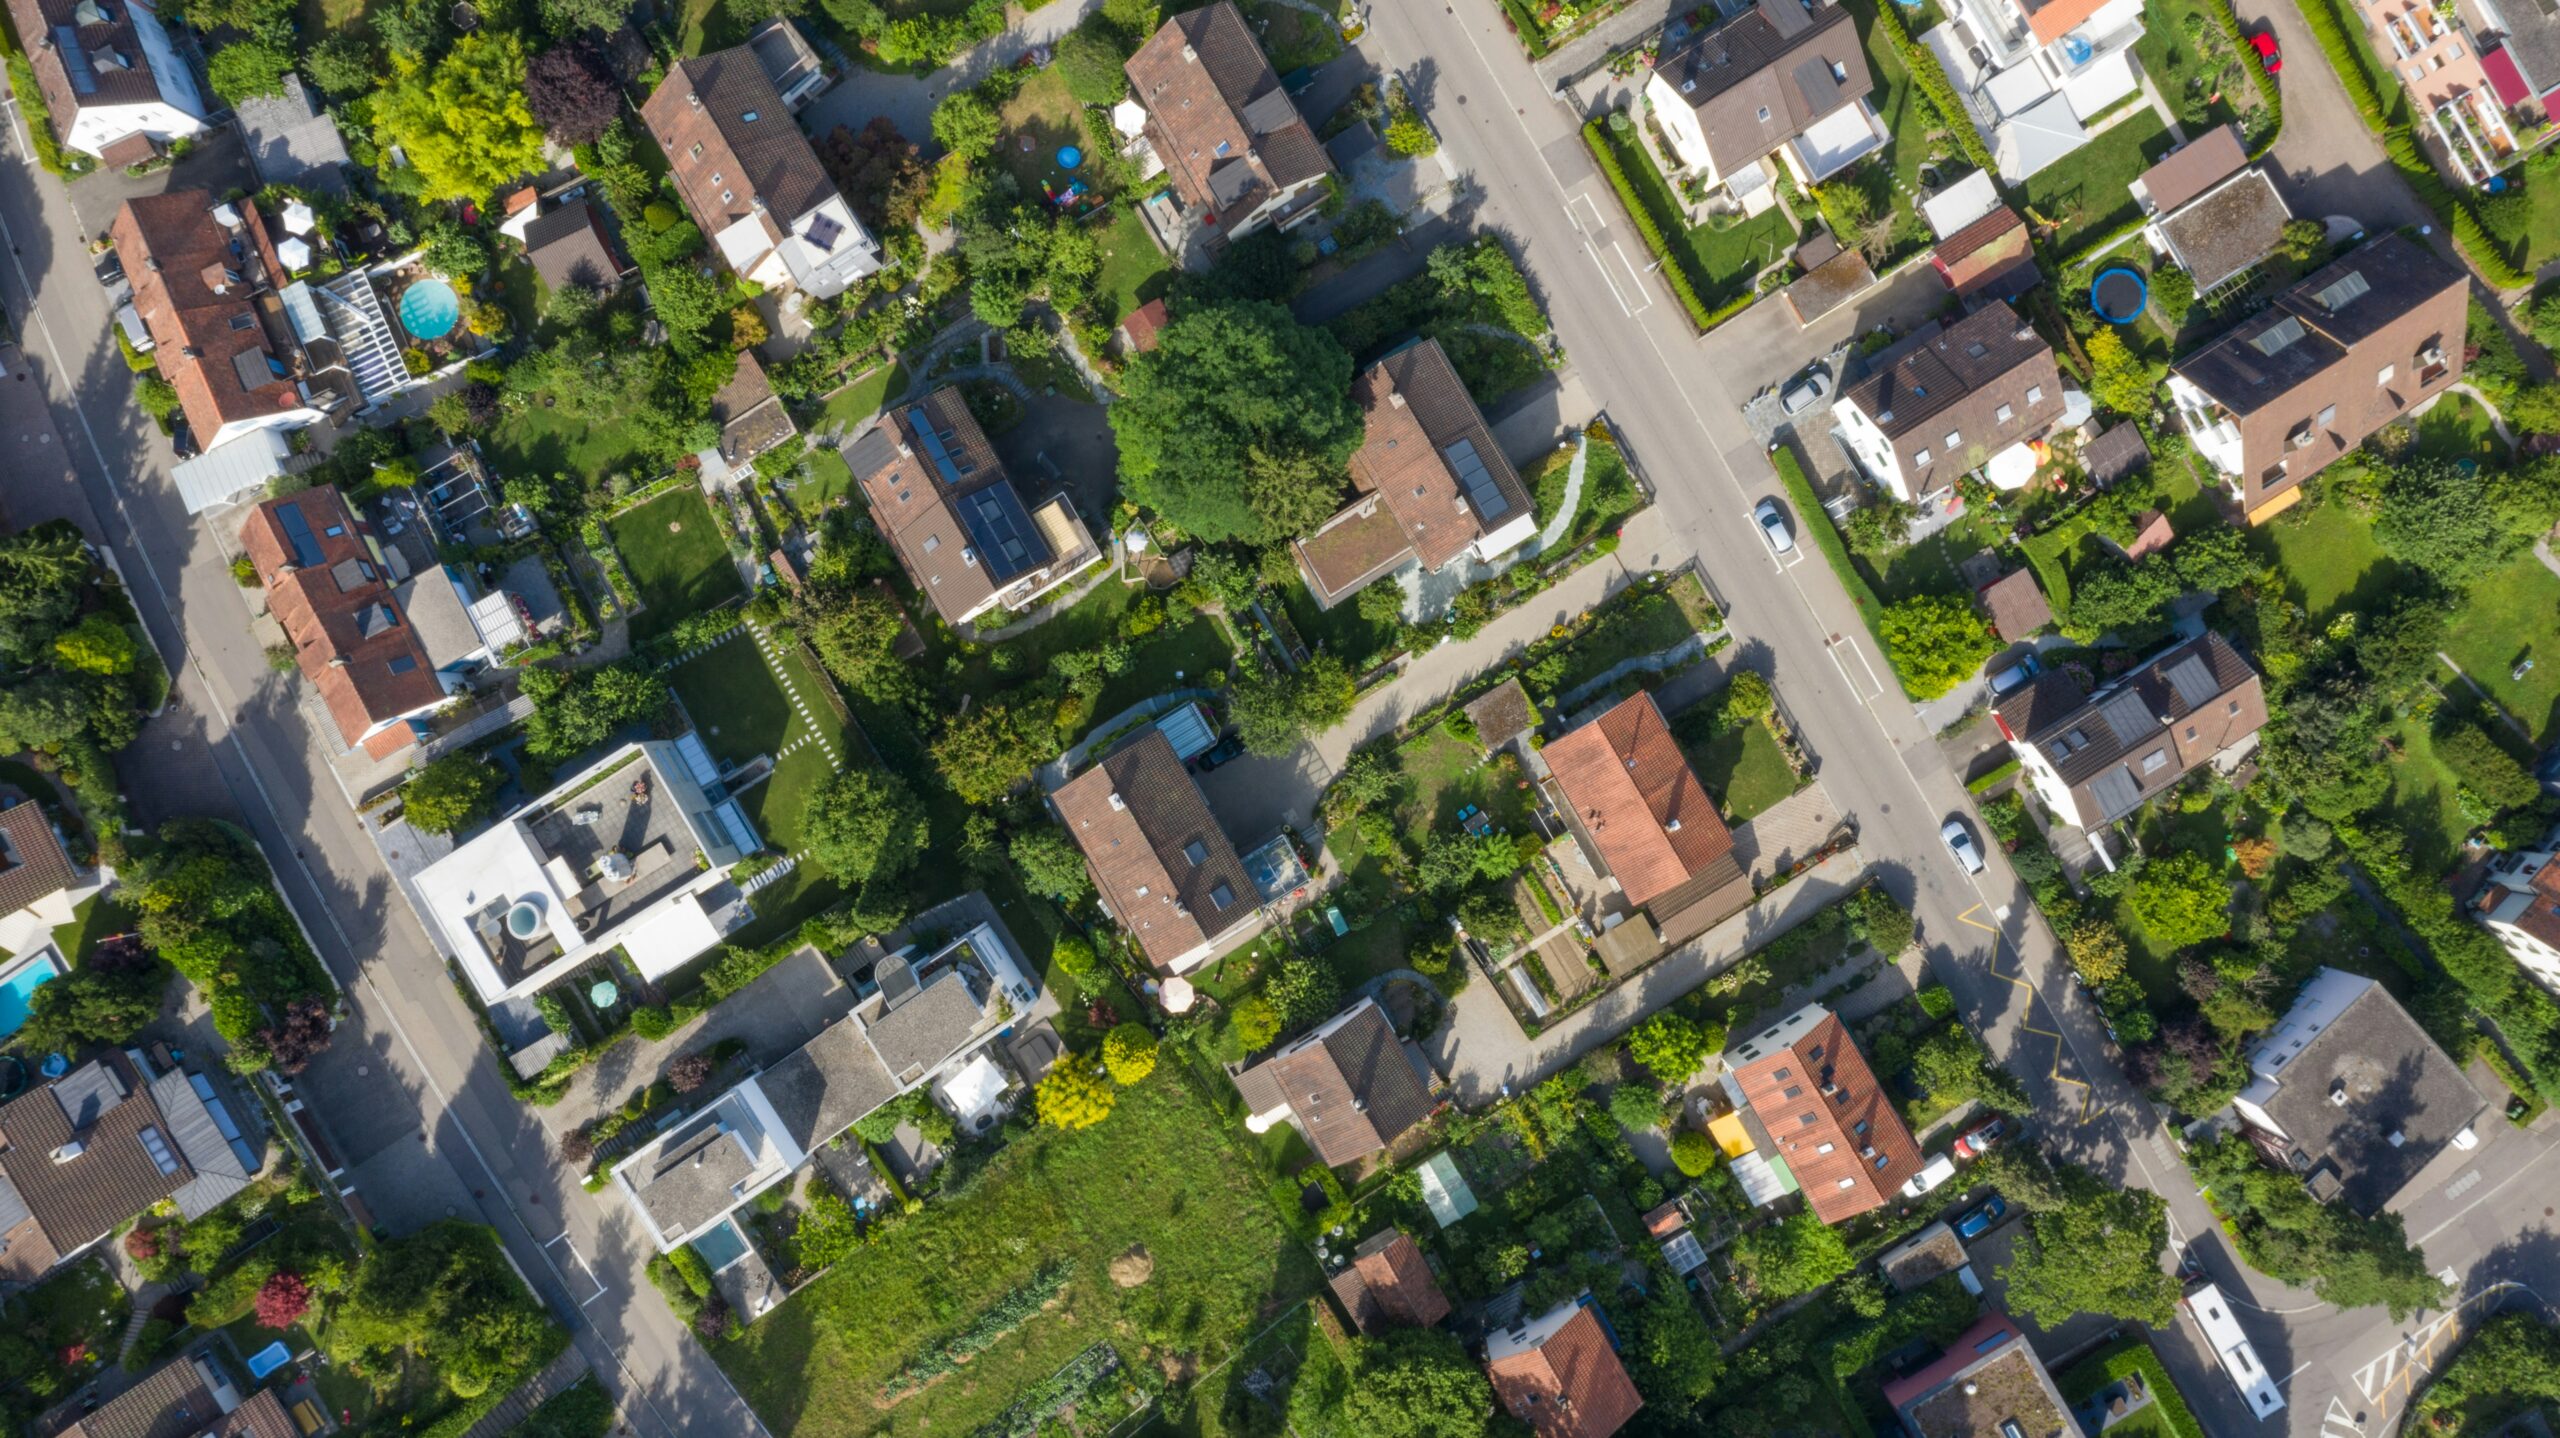 Aerial view of a neighborhood including houses, cars, streets, and greenery